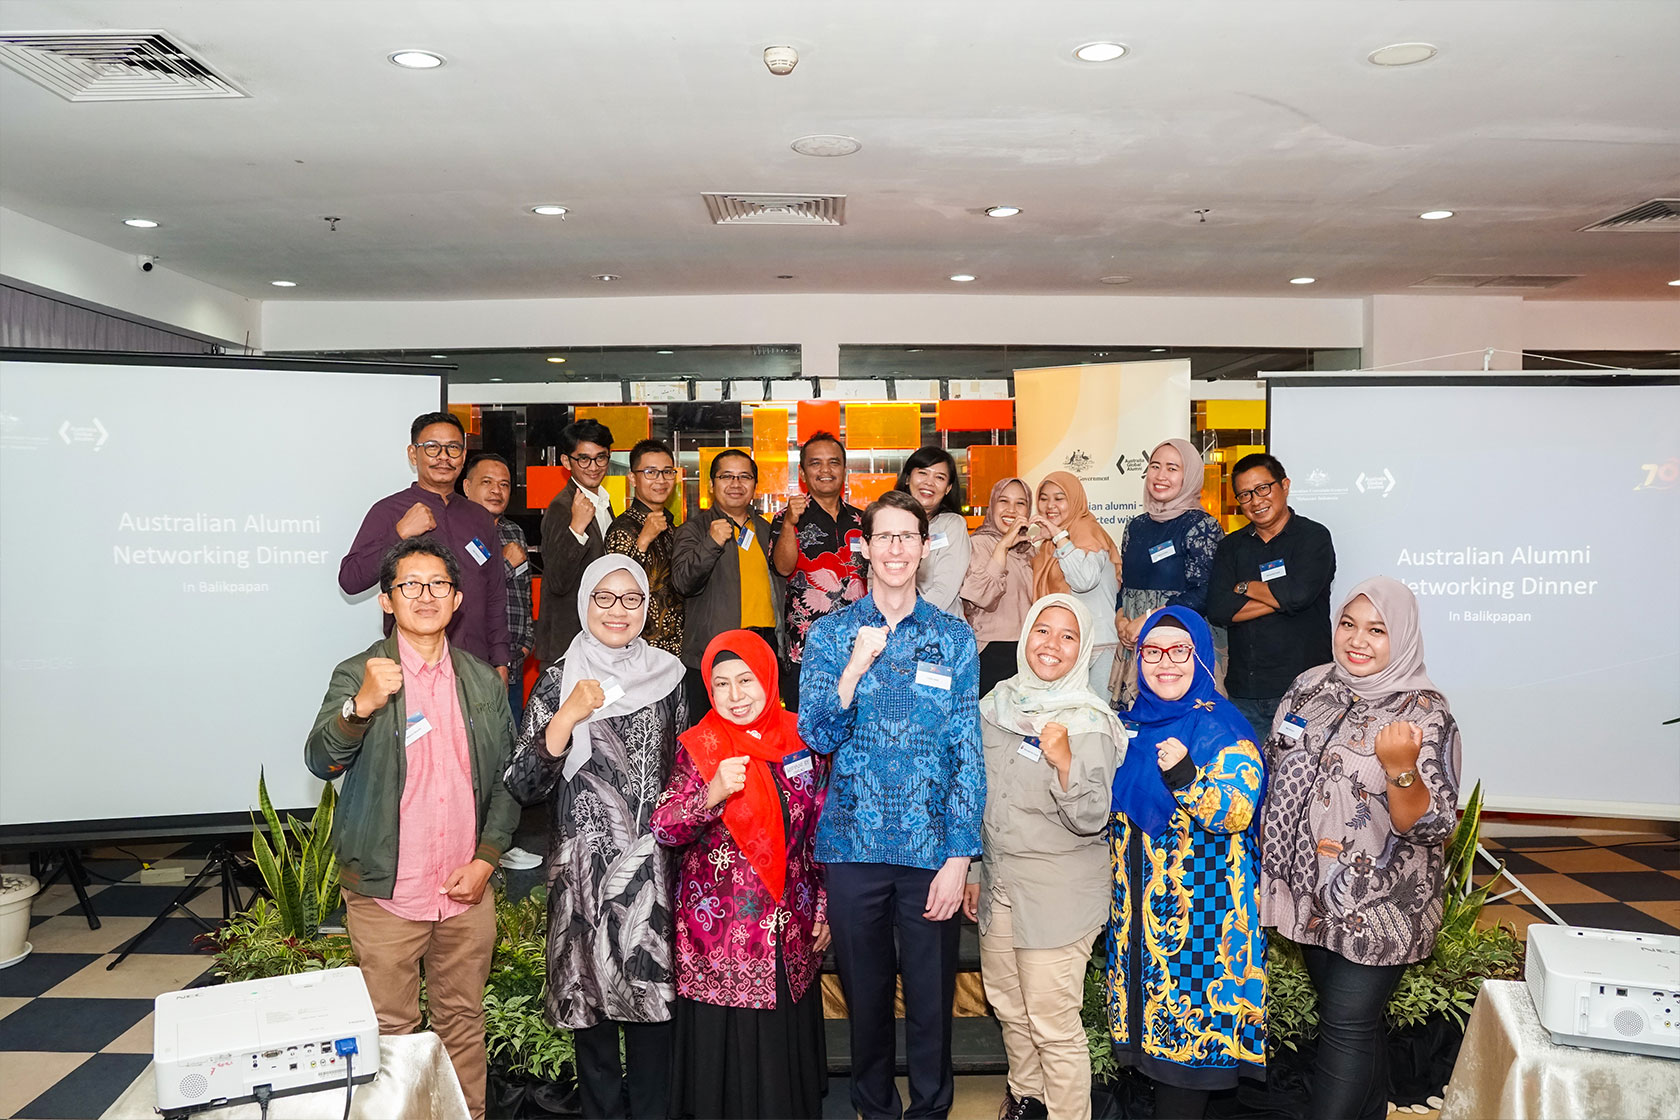 Australia's Consul-General in Makassar, Mr Todd Dias, cherishes a moment of camaraderie with our alumni before a delightful dinner, fostering connections that transcend borders.